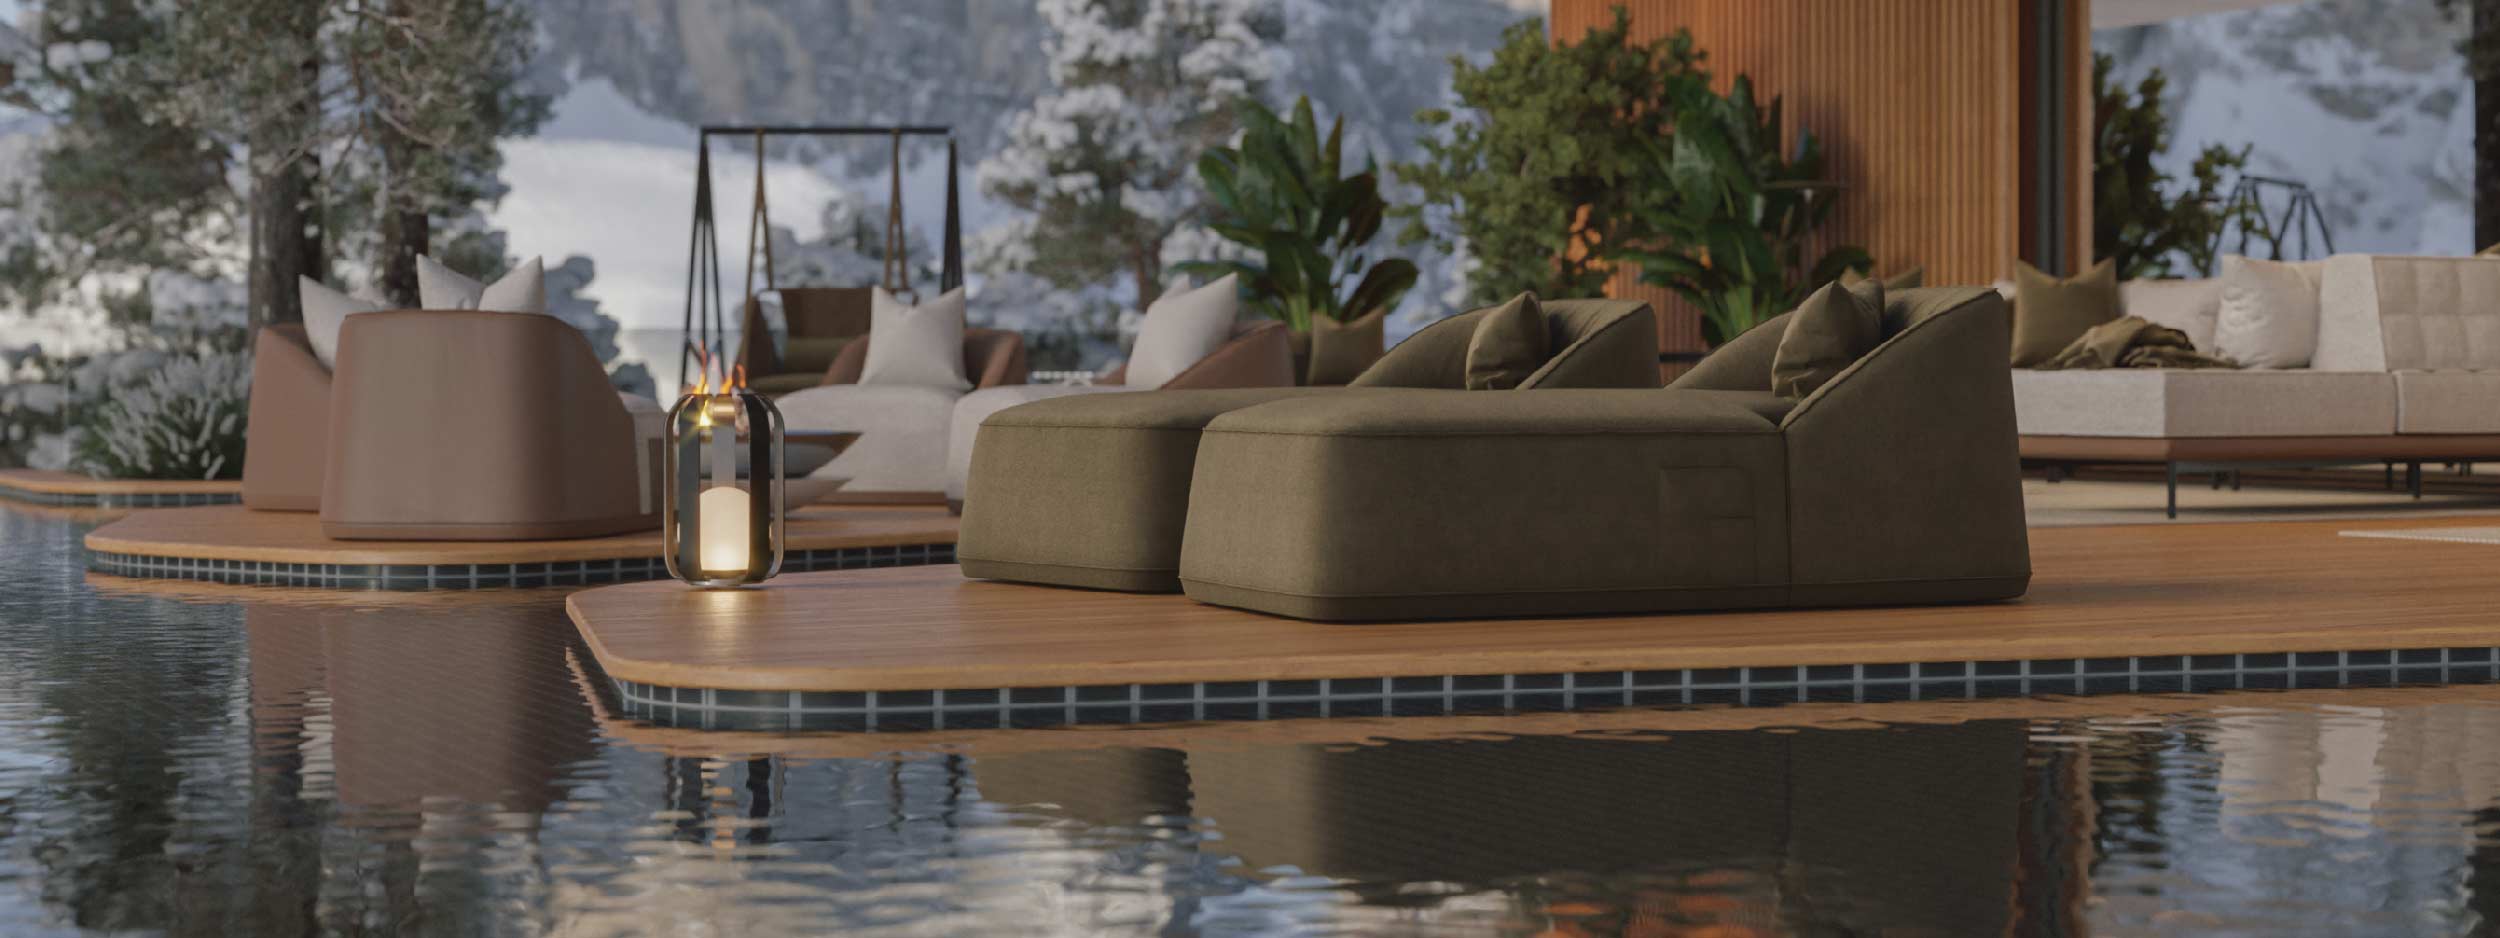 Image of pair of Myface Flow chaise longue on poolside, with Mo lounge furniture and snow-covered mountains in the background